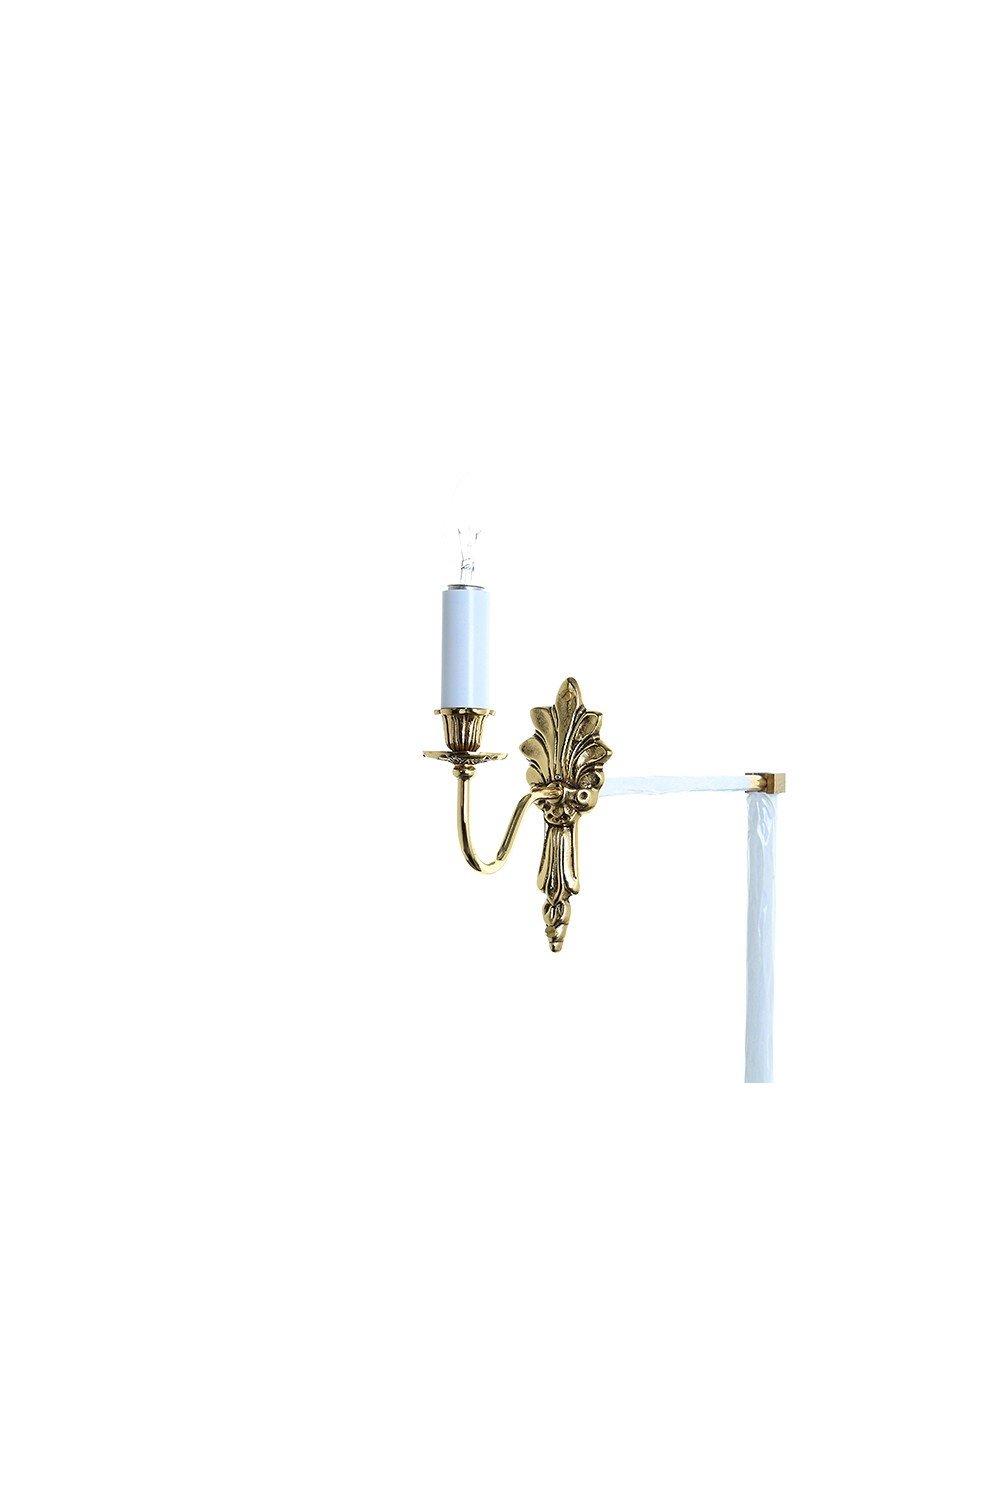 Goodwood 1 Light Polished Brass Candle Wall Lamp